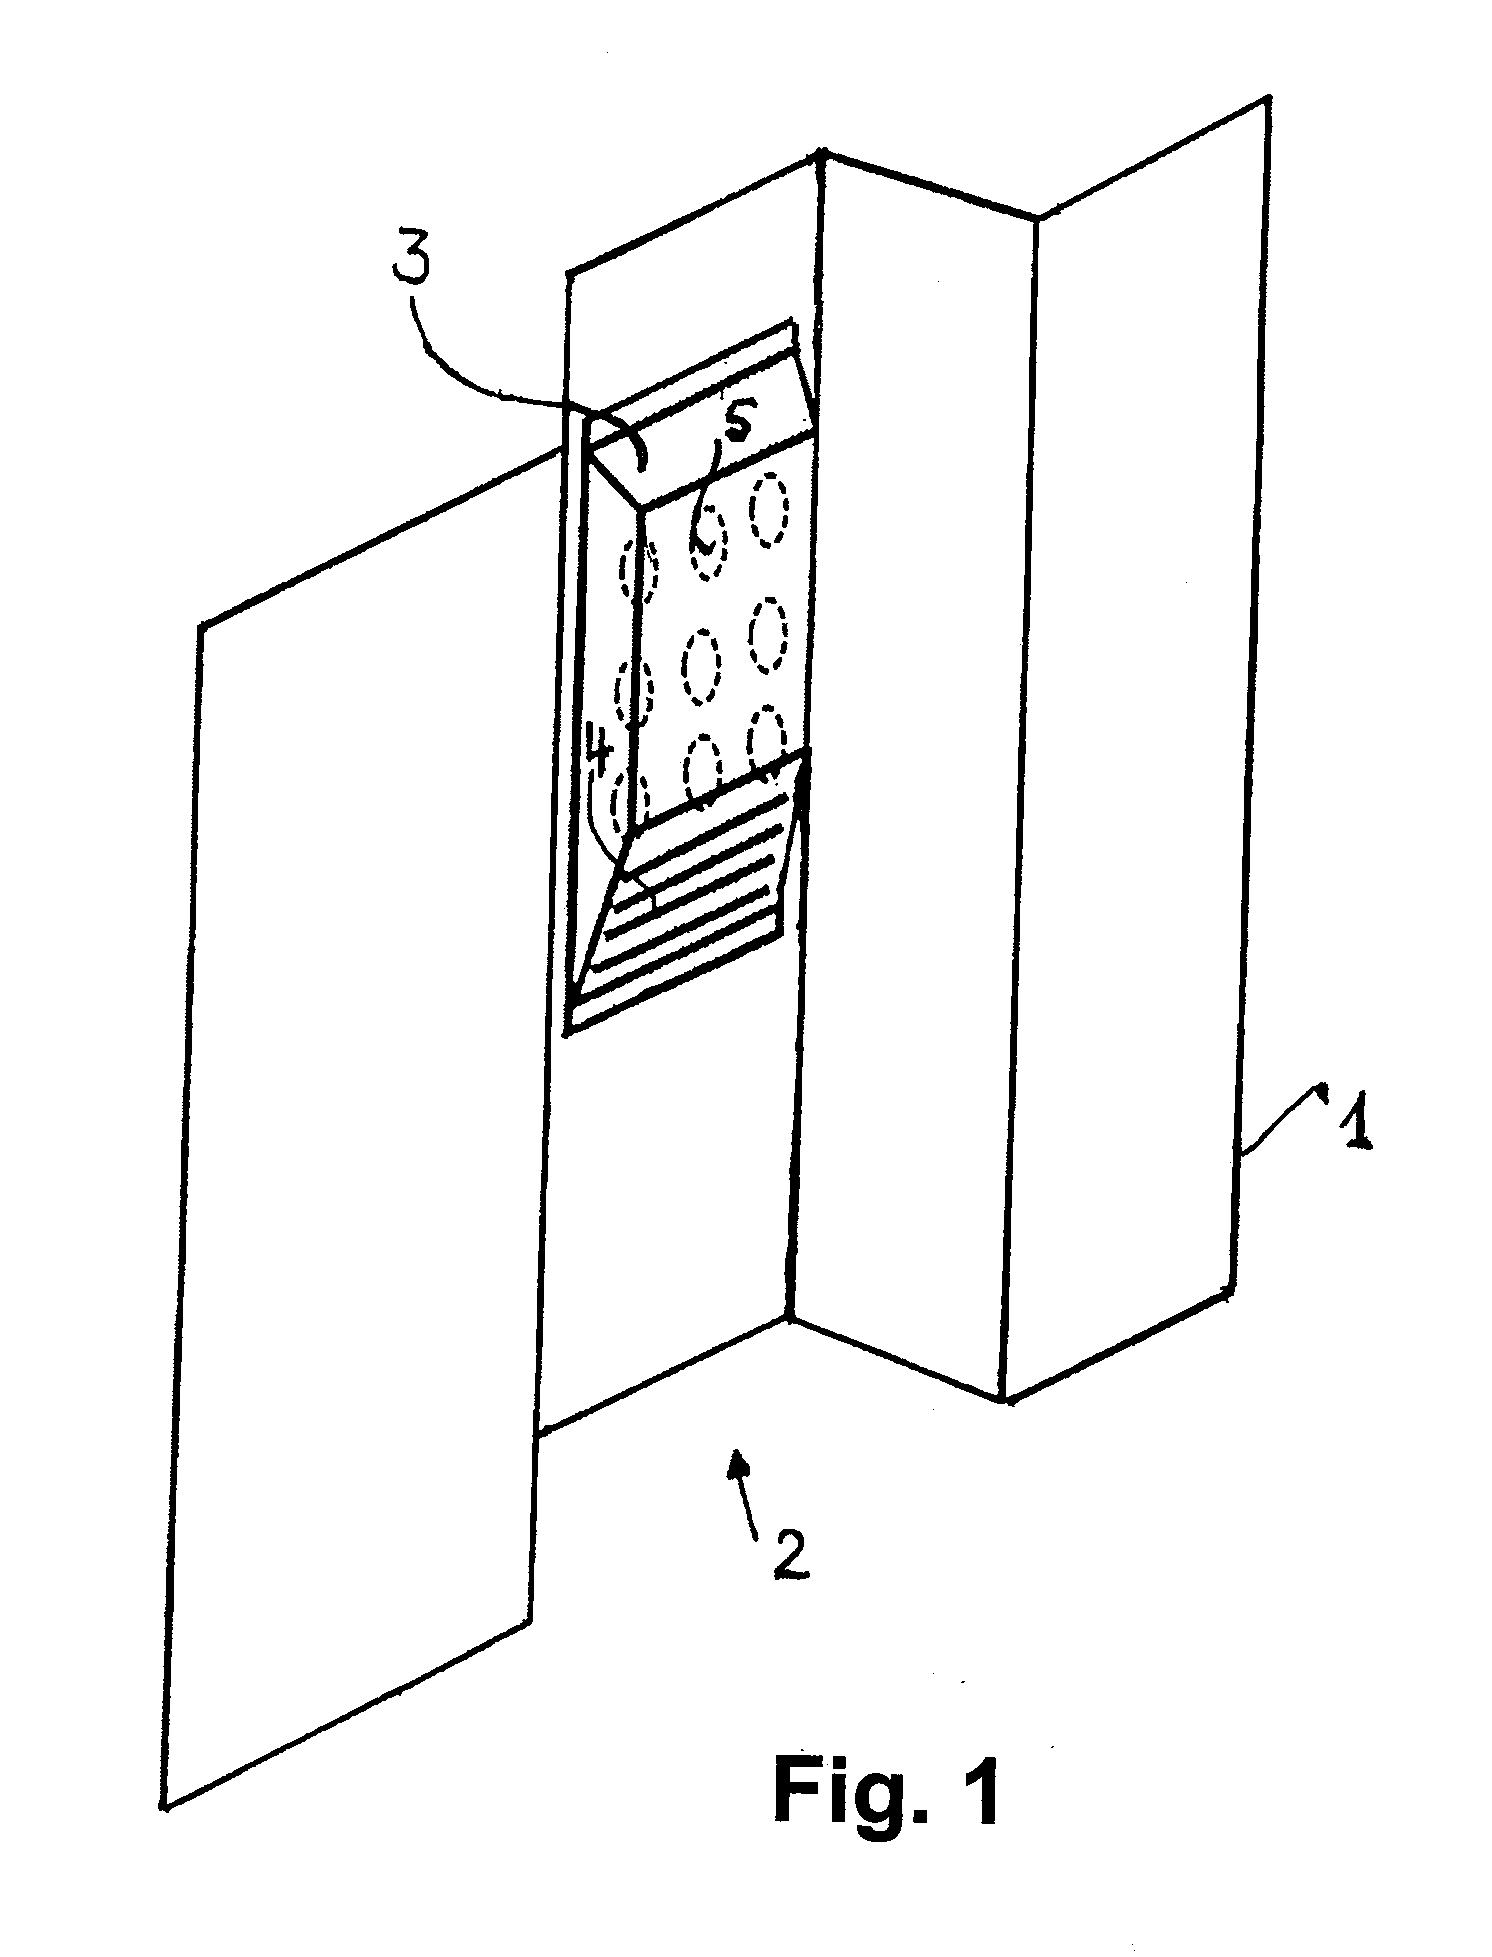 Arrangement of an antenna on a container